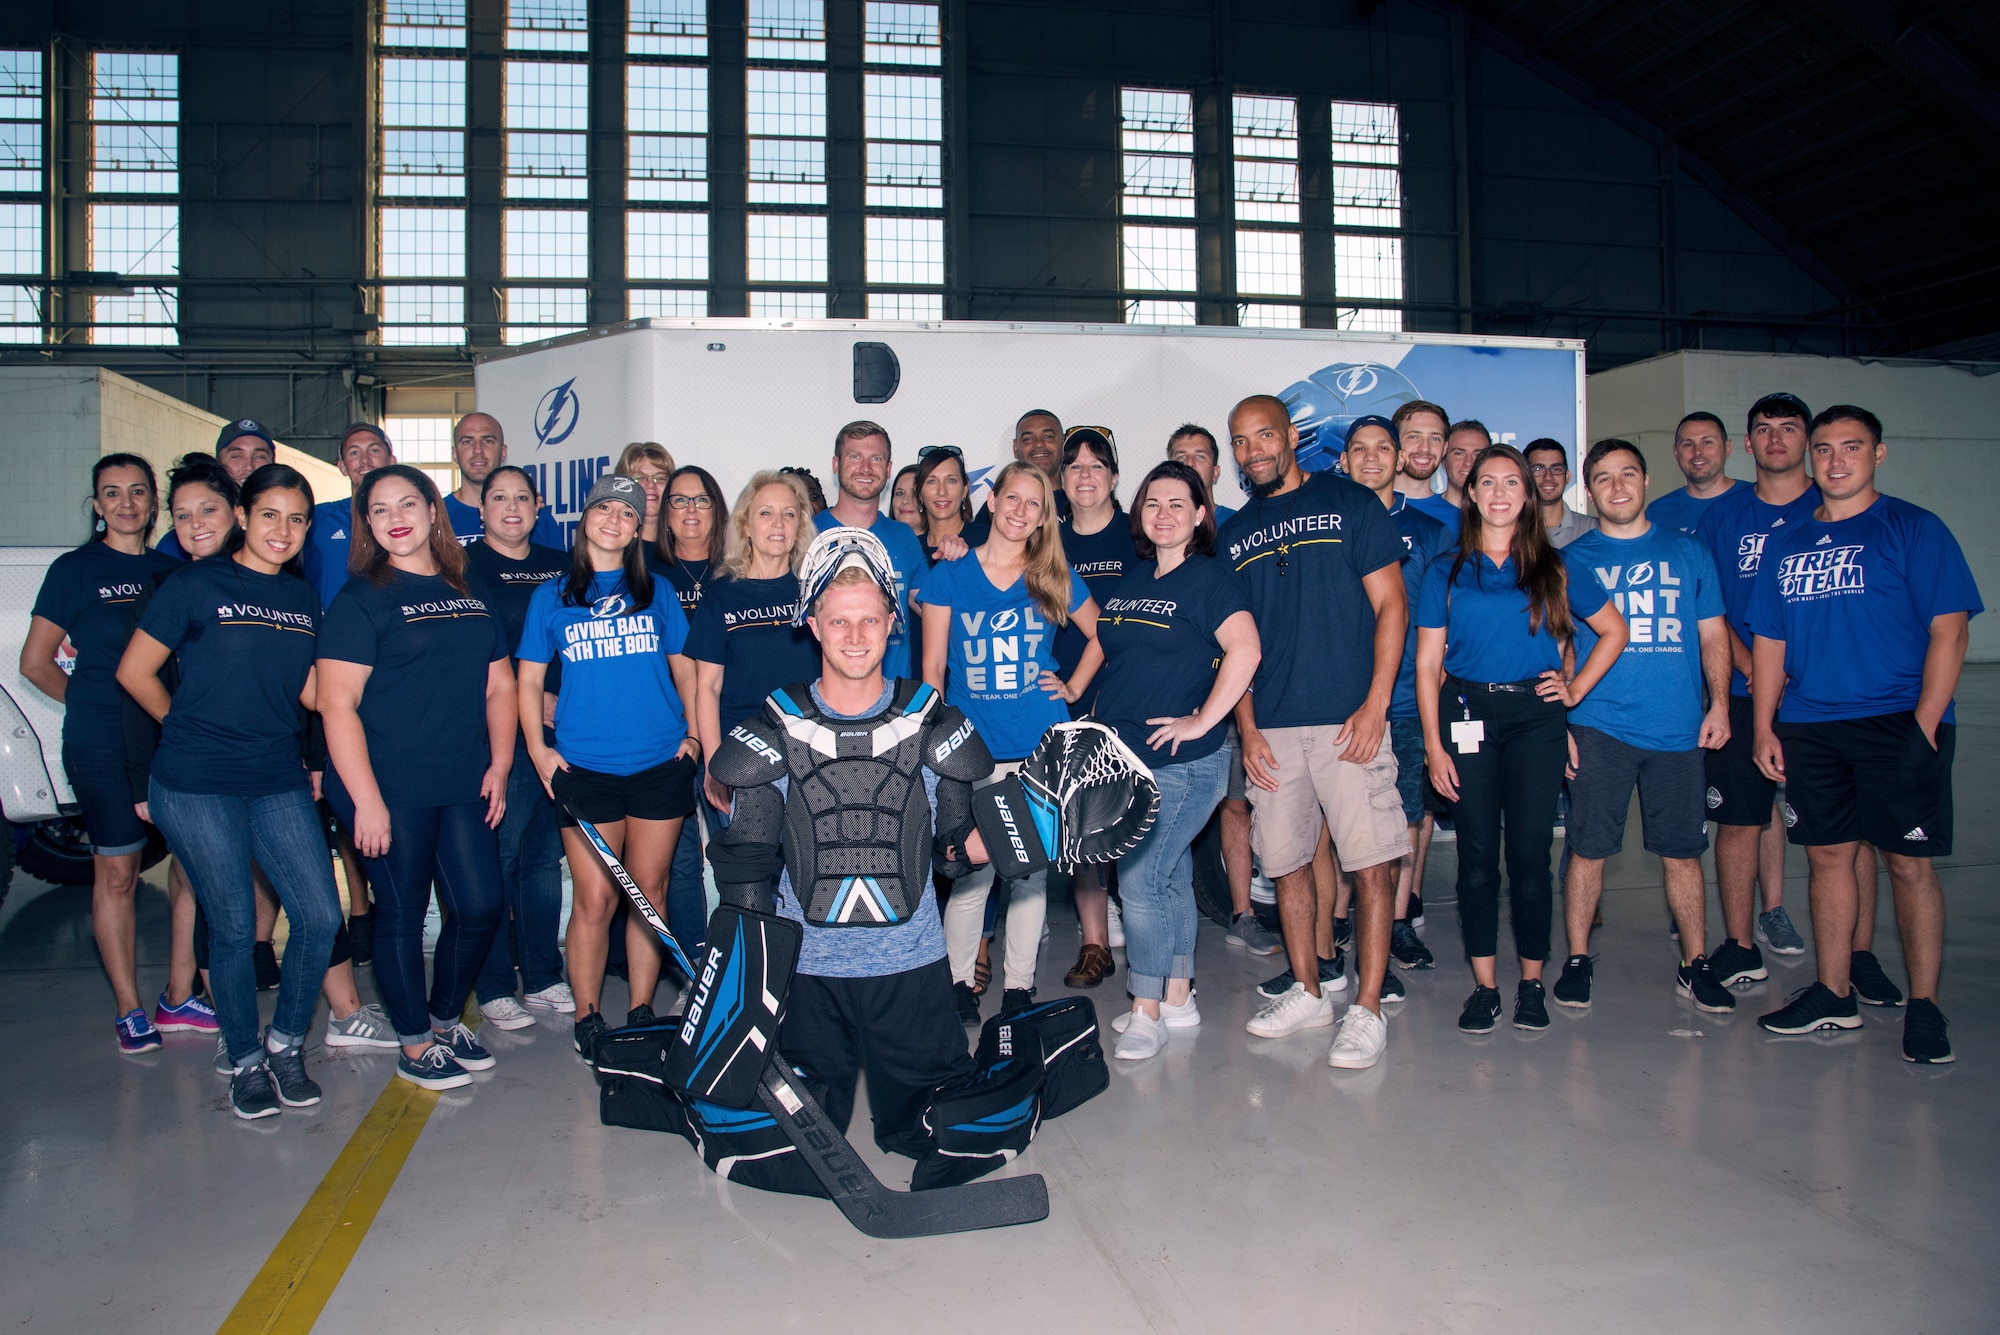 Tampa Bay Lightning’s Street Team and USAA volunteers pose for a photo at Hangar 4 on MacDill Air Force Base, Florida, Oct. 25, 2018.